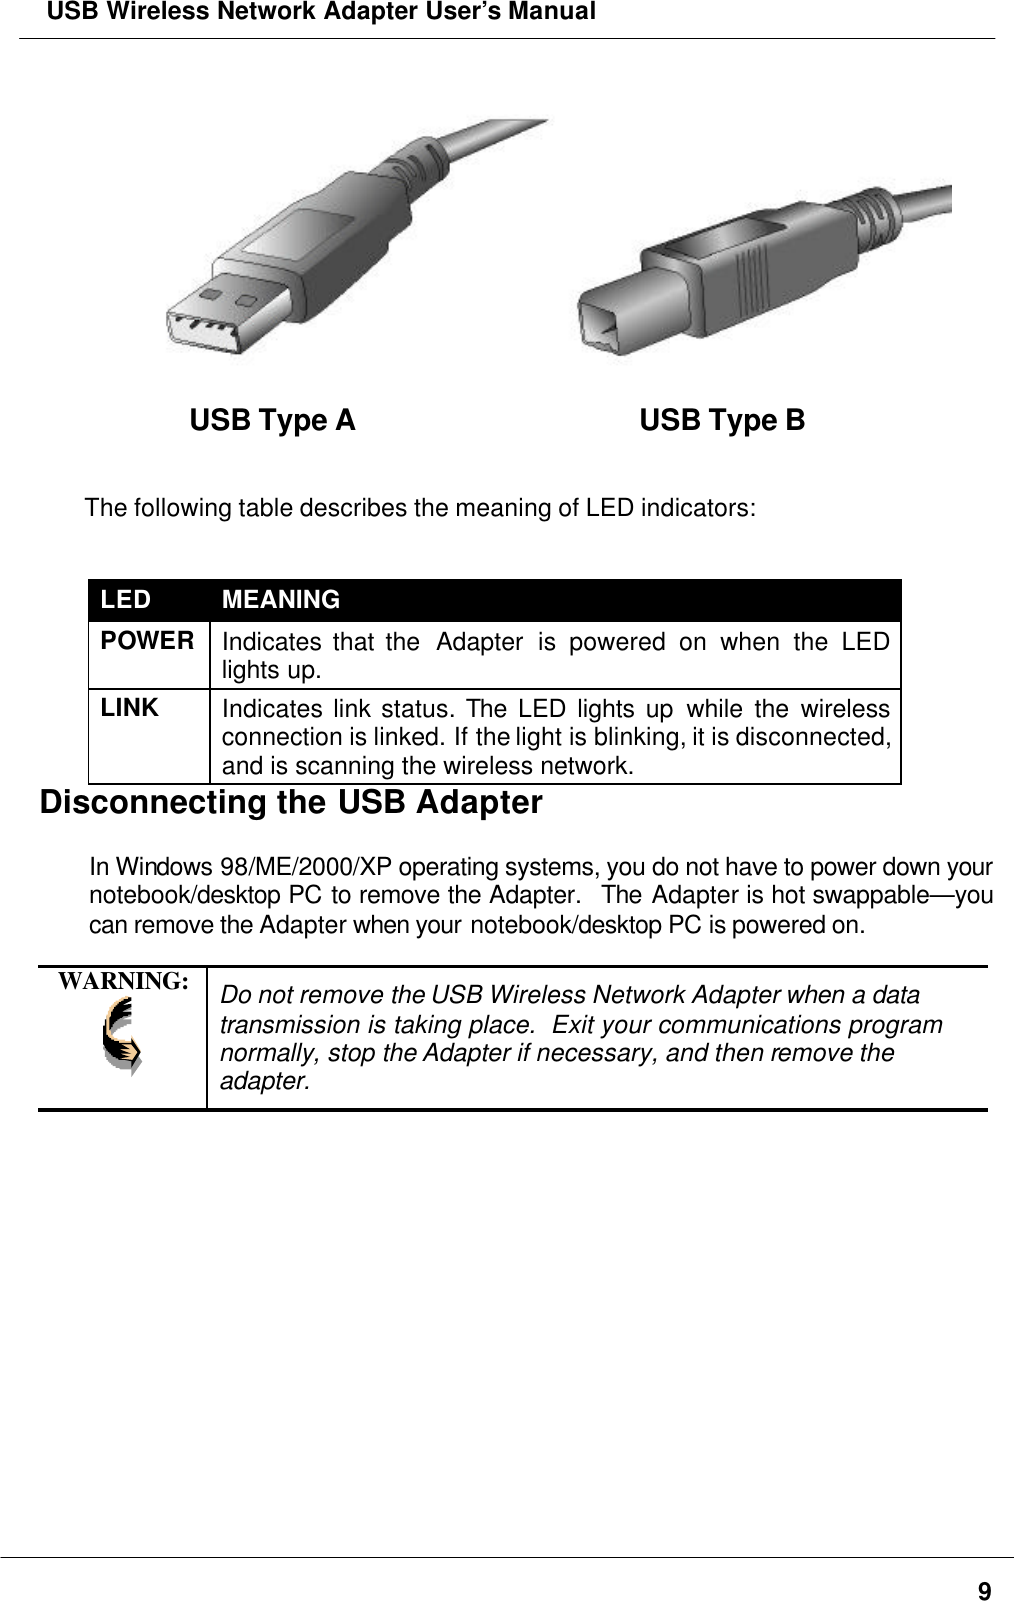  USB Wireless Network Adapter User’s Manual9USB Type A USB Type BThe following table describes the meaning of LED indicators:LED MEANINGPOWERIndicates that the  Adapter is powered on when the LEDlights up.LINK Indicates link status. The LED lights up while the wirelessconnection is linked. If the light is blinking, it is disconnected,and is scanning the wireless network.Disconnecting the USB AdapterIn Windows 98/ME/2000/XP operating systems, you do not have to power down yournotebook/desktop PC to remove the Adapter.  The Adapter is hot swappable—youcan remove the Adapter when your notebook/desktop PC is powered on.WARNING: Do not remove the USB Wireless Network Adapter when a datatransmission is taking place.  Exit your communications programnormally, stop the Adapter if necessary, and then remove theadapter.